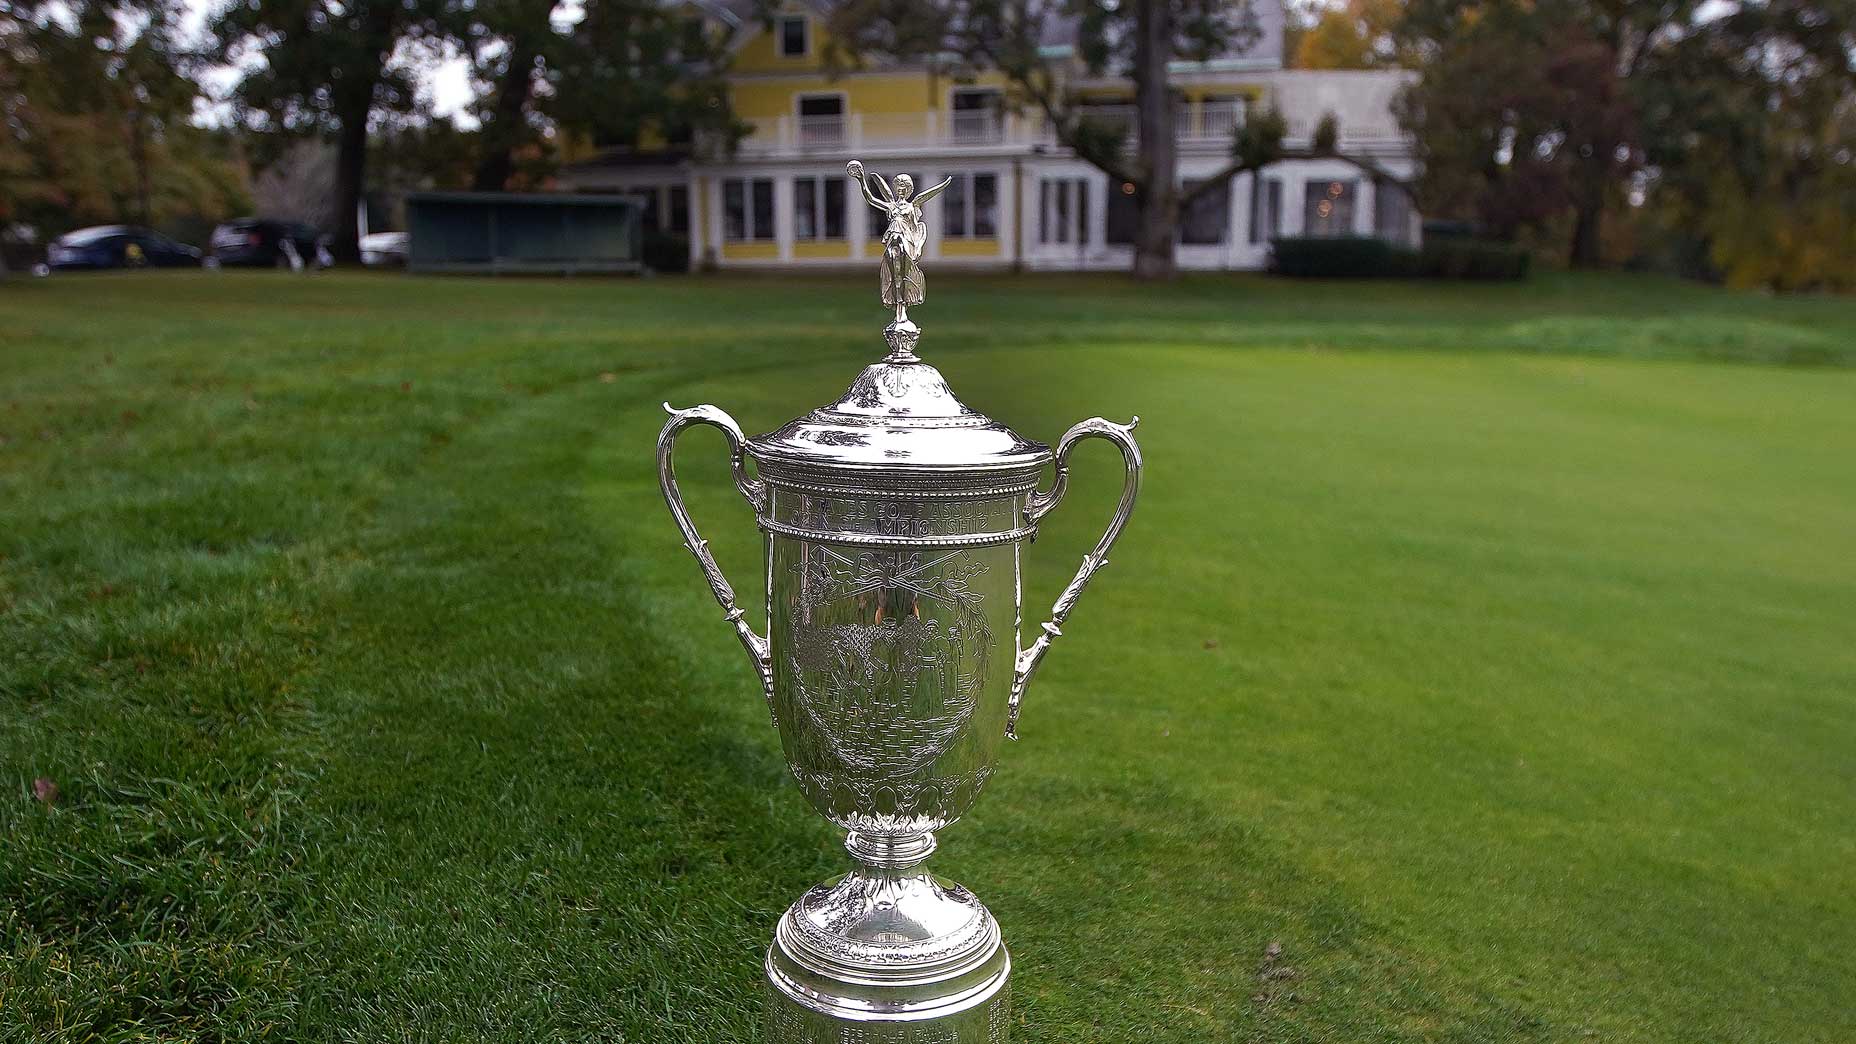 2022 U.S. Open sectional qualifying sites, live scores, notables competing